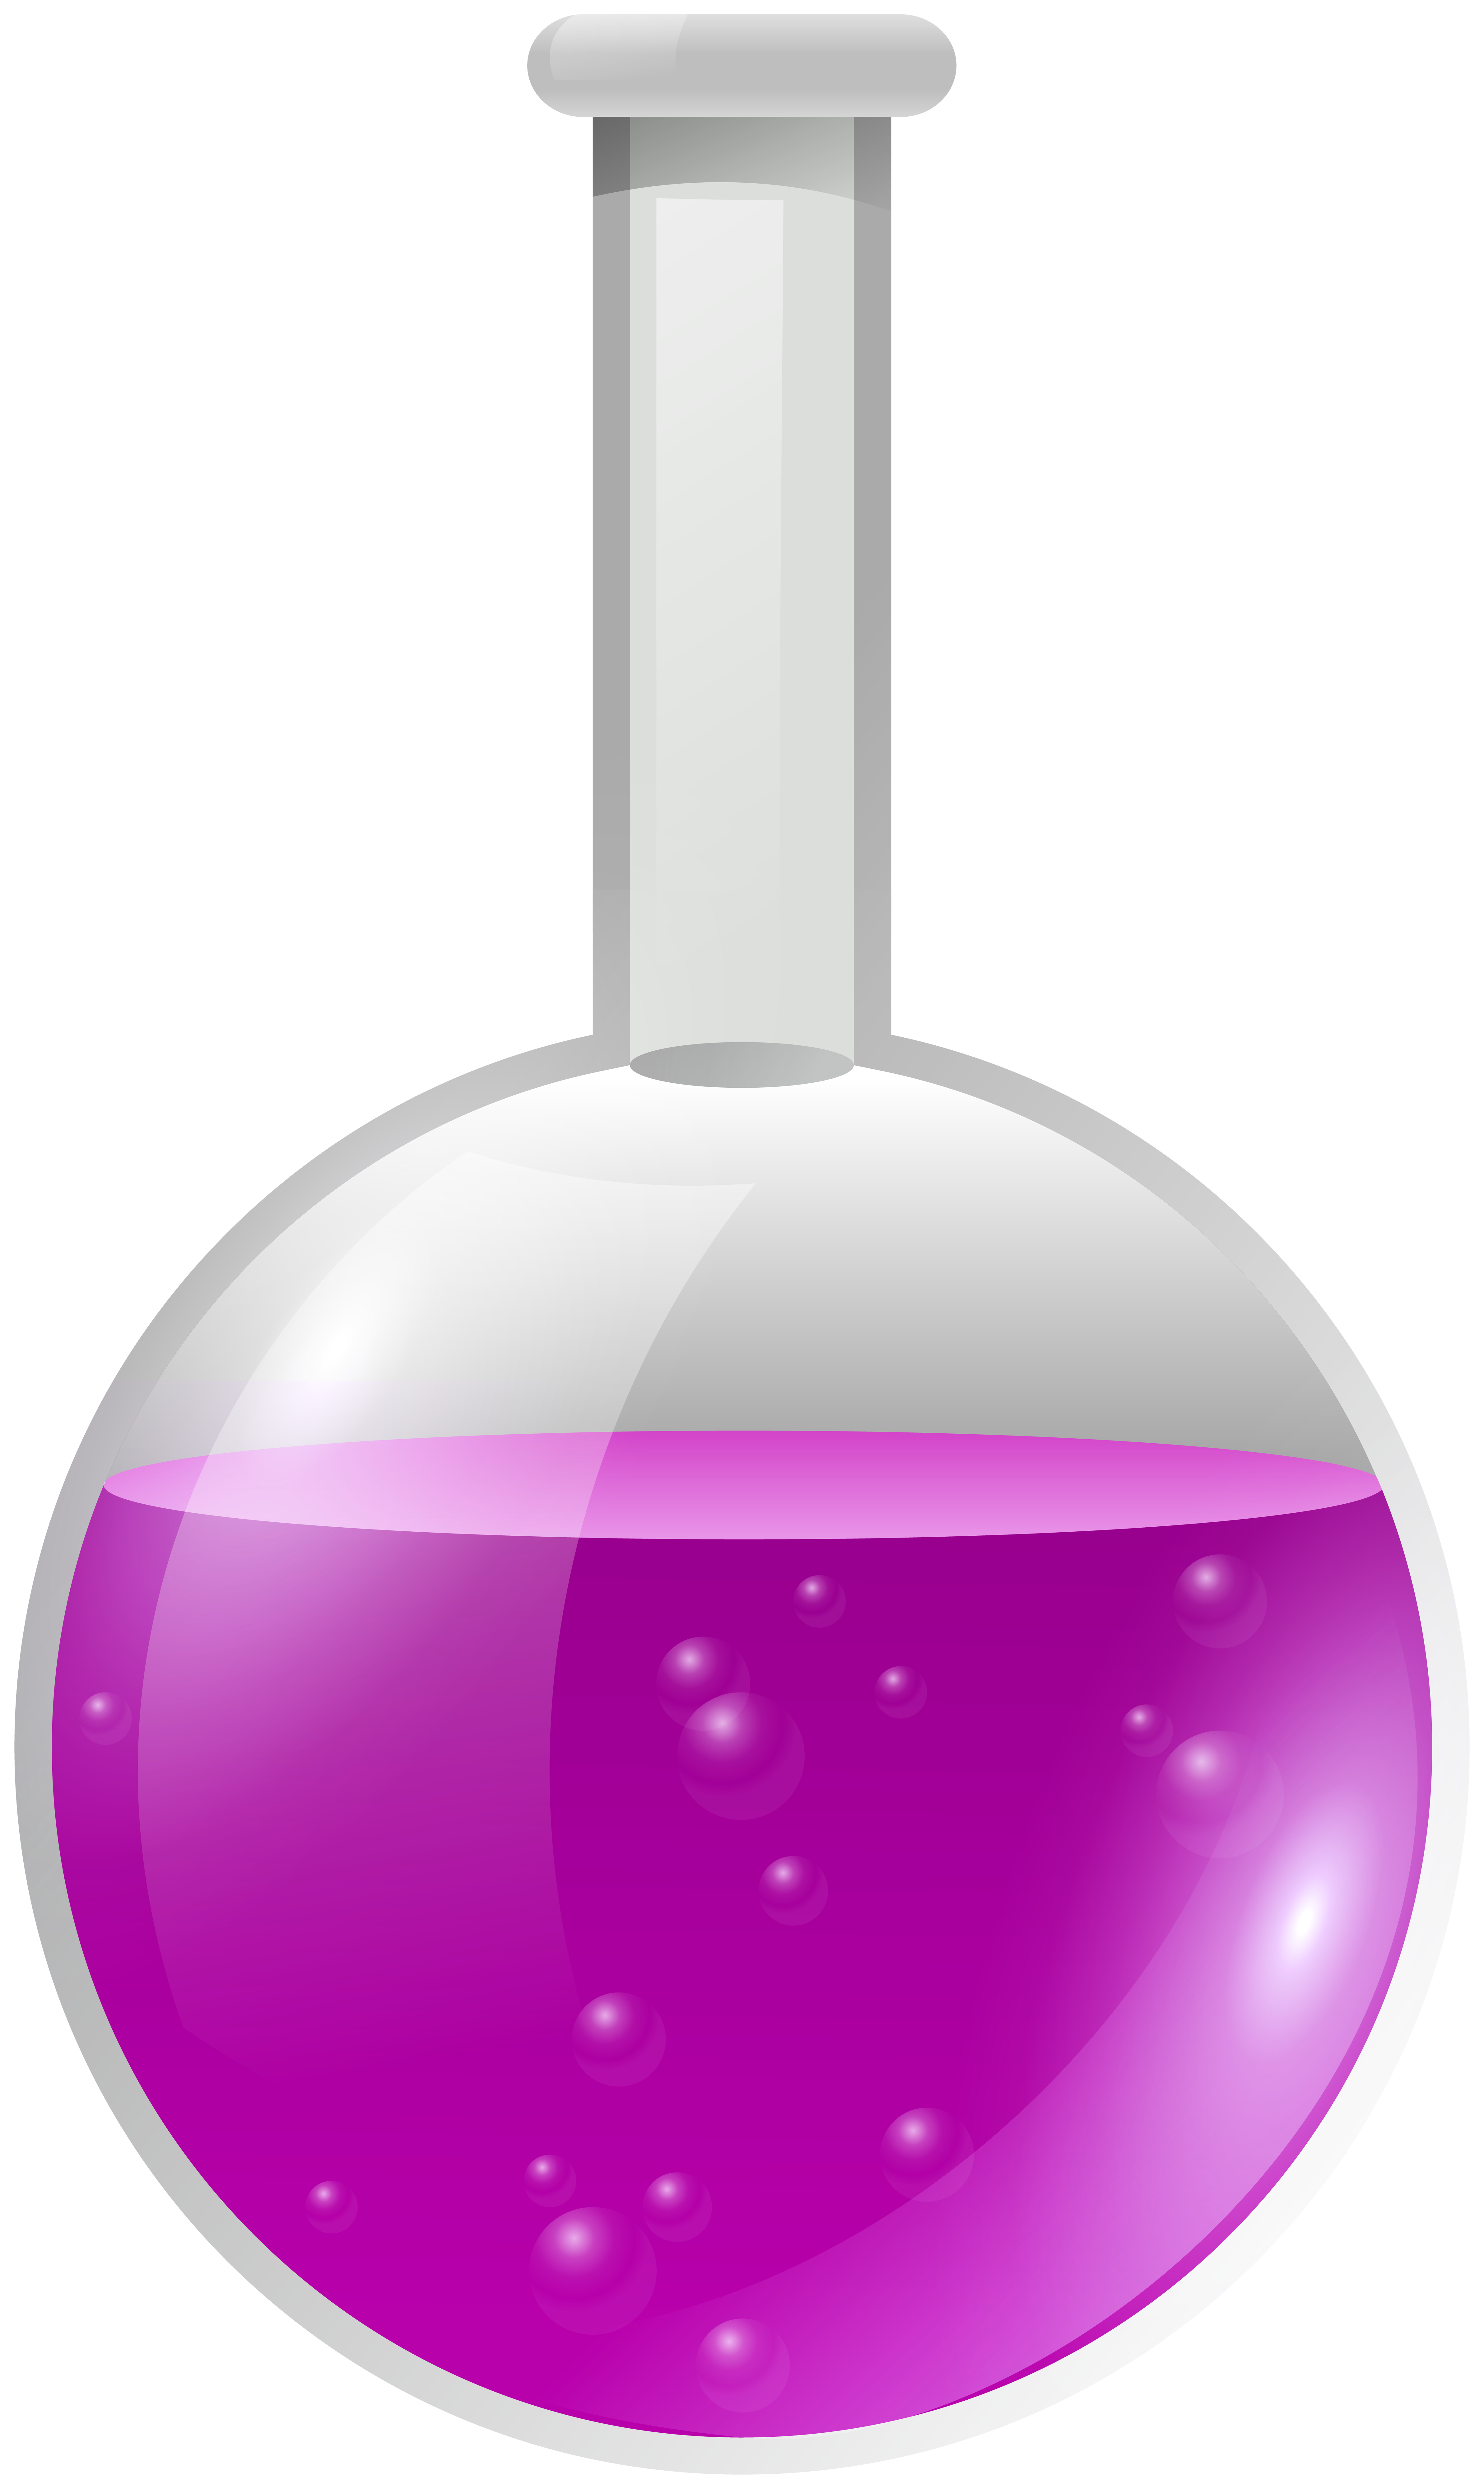 Transparent Purple Flask PNG Clipart​  Gallery Yopriceville - High-Quality  Free Images and Transparent PNG Clipart